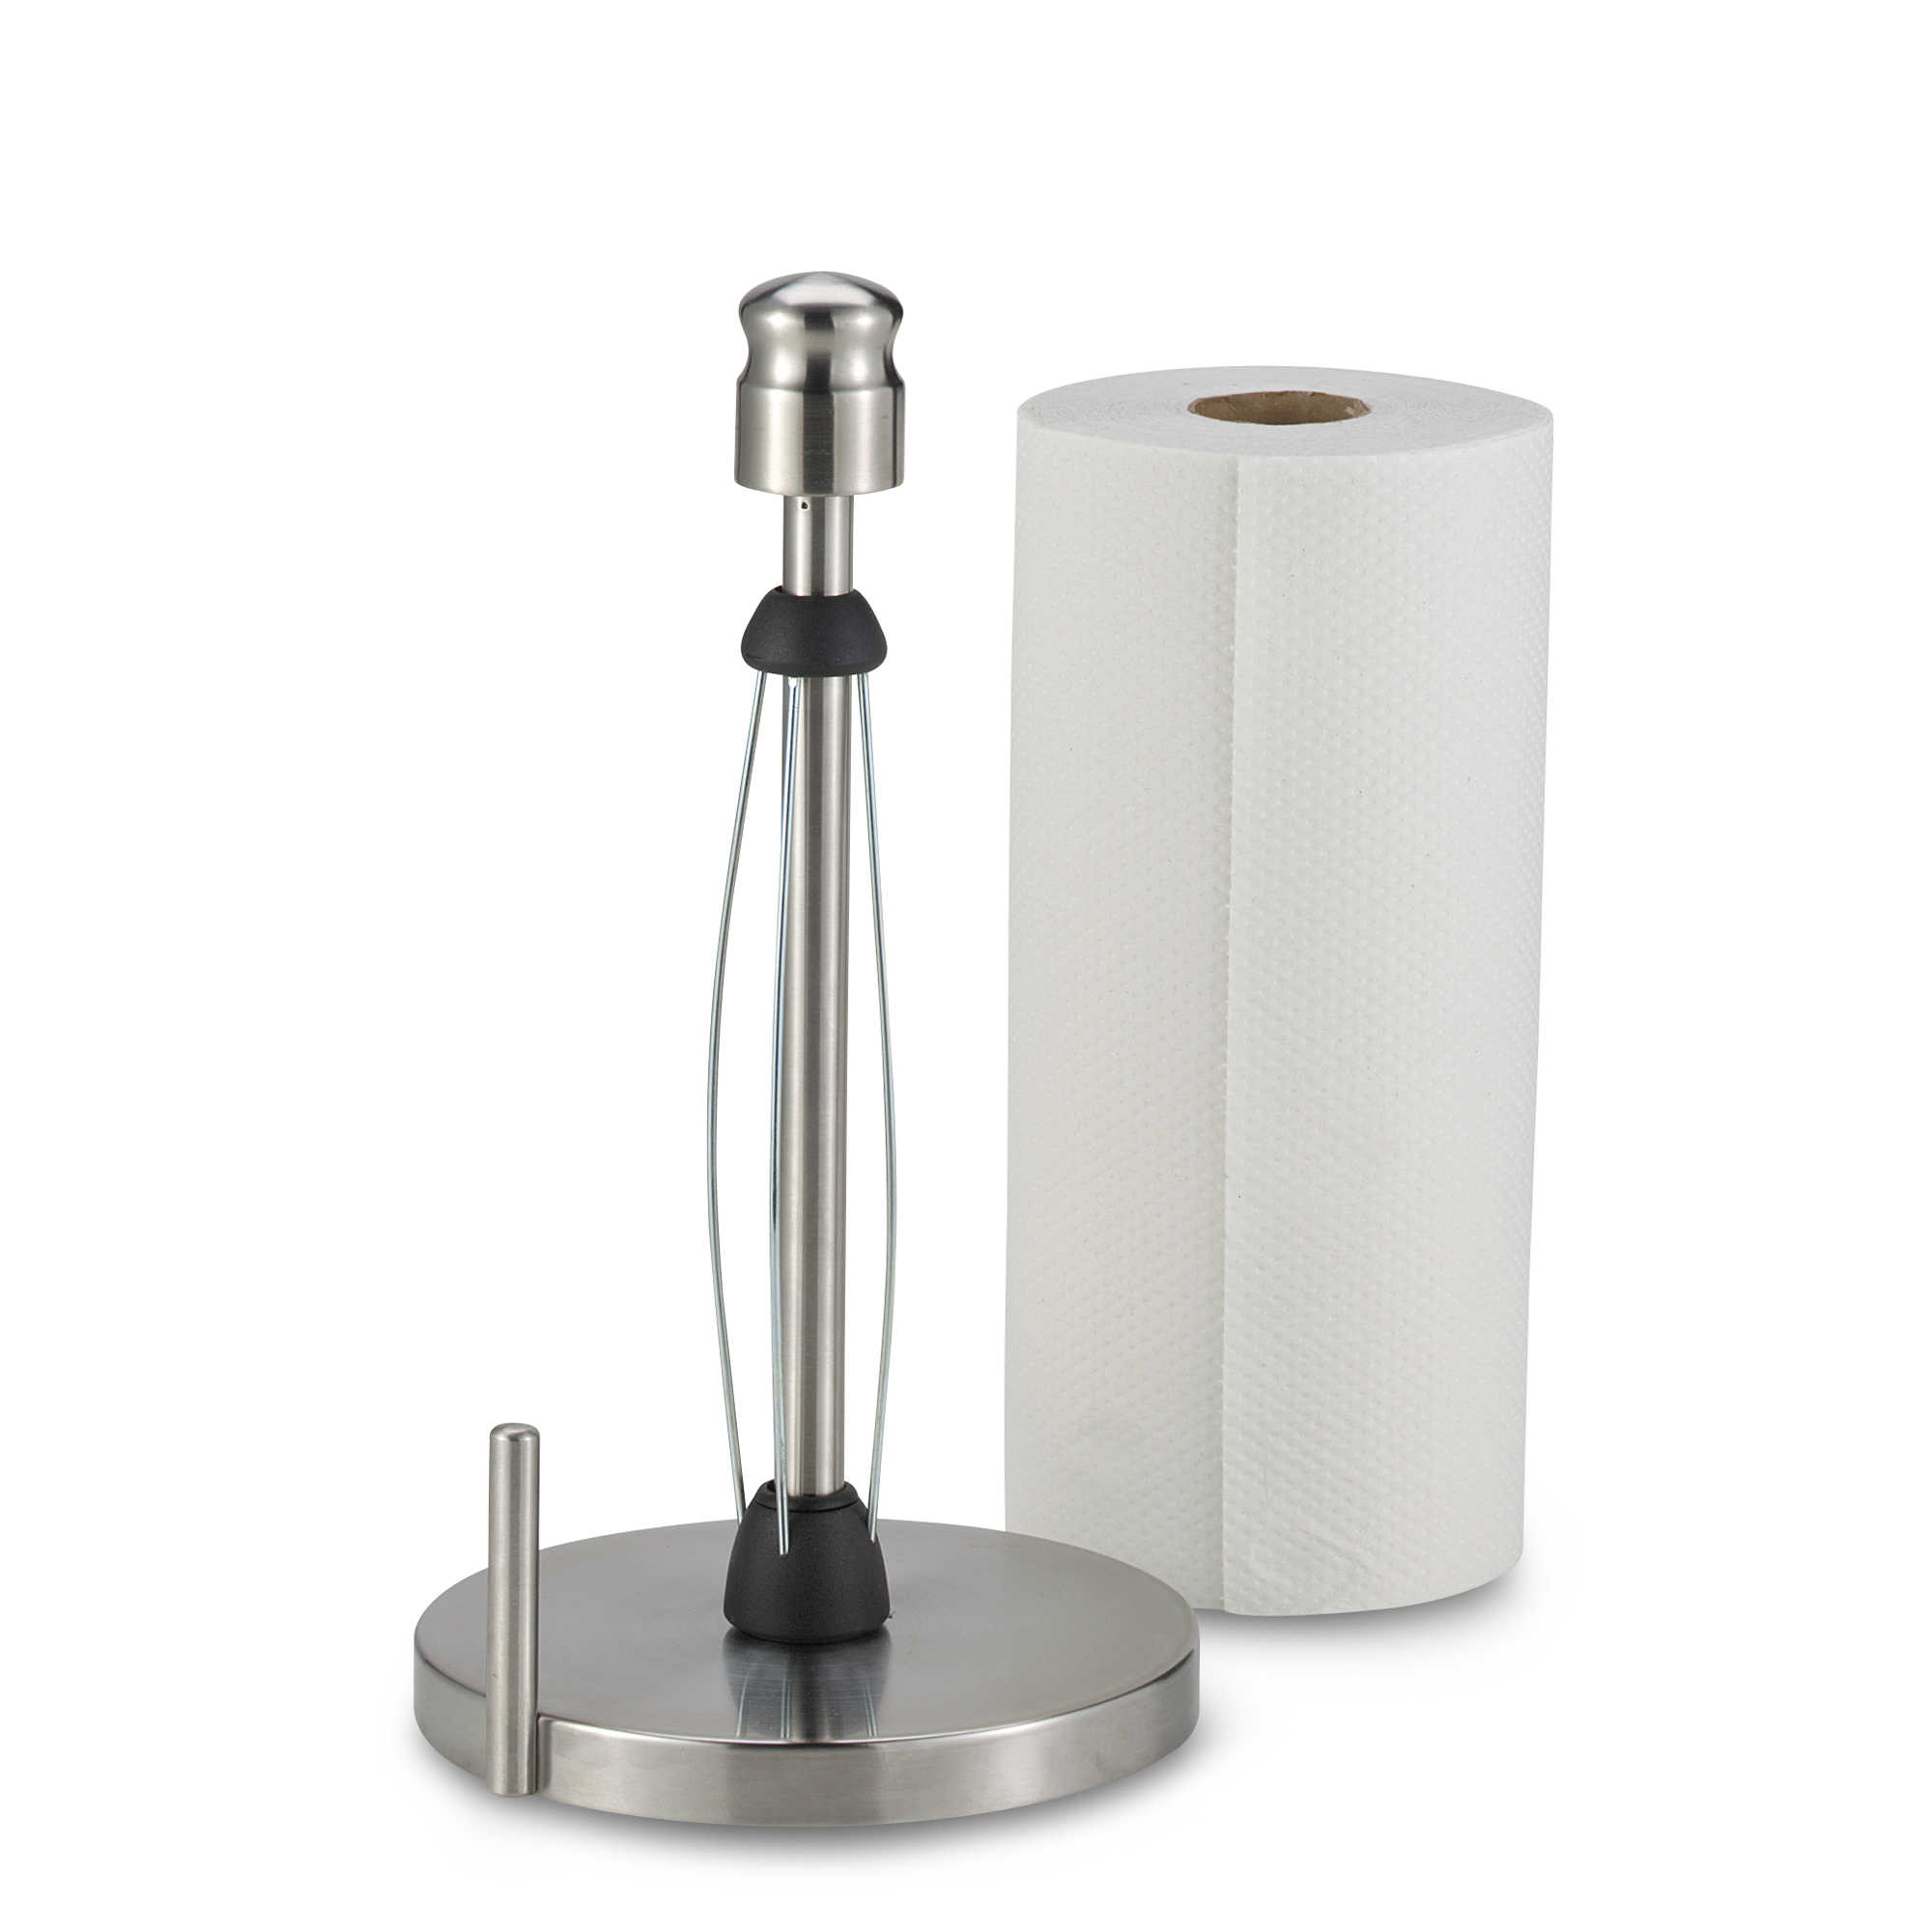 Perfect Tear Paper Towel Holder - Bed Bath & Beyond - Perfect Tear Paper Towel Holder